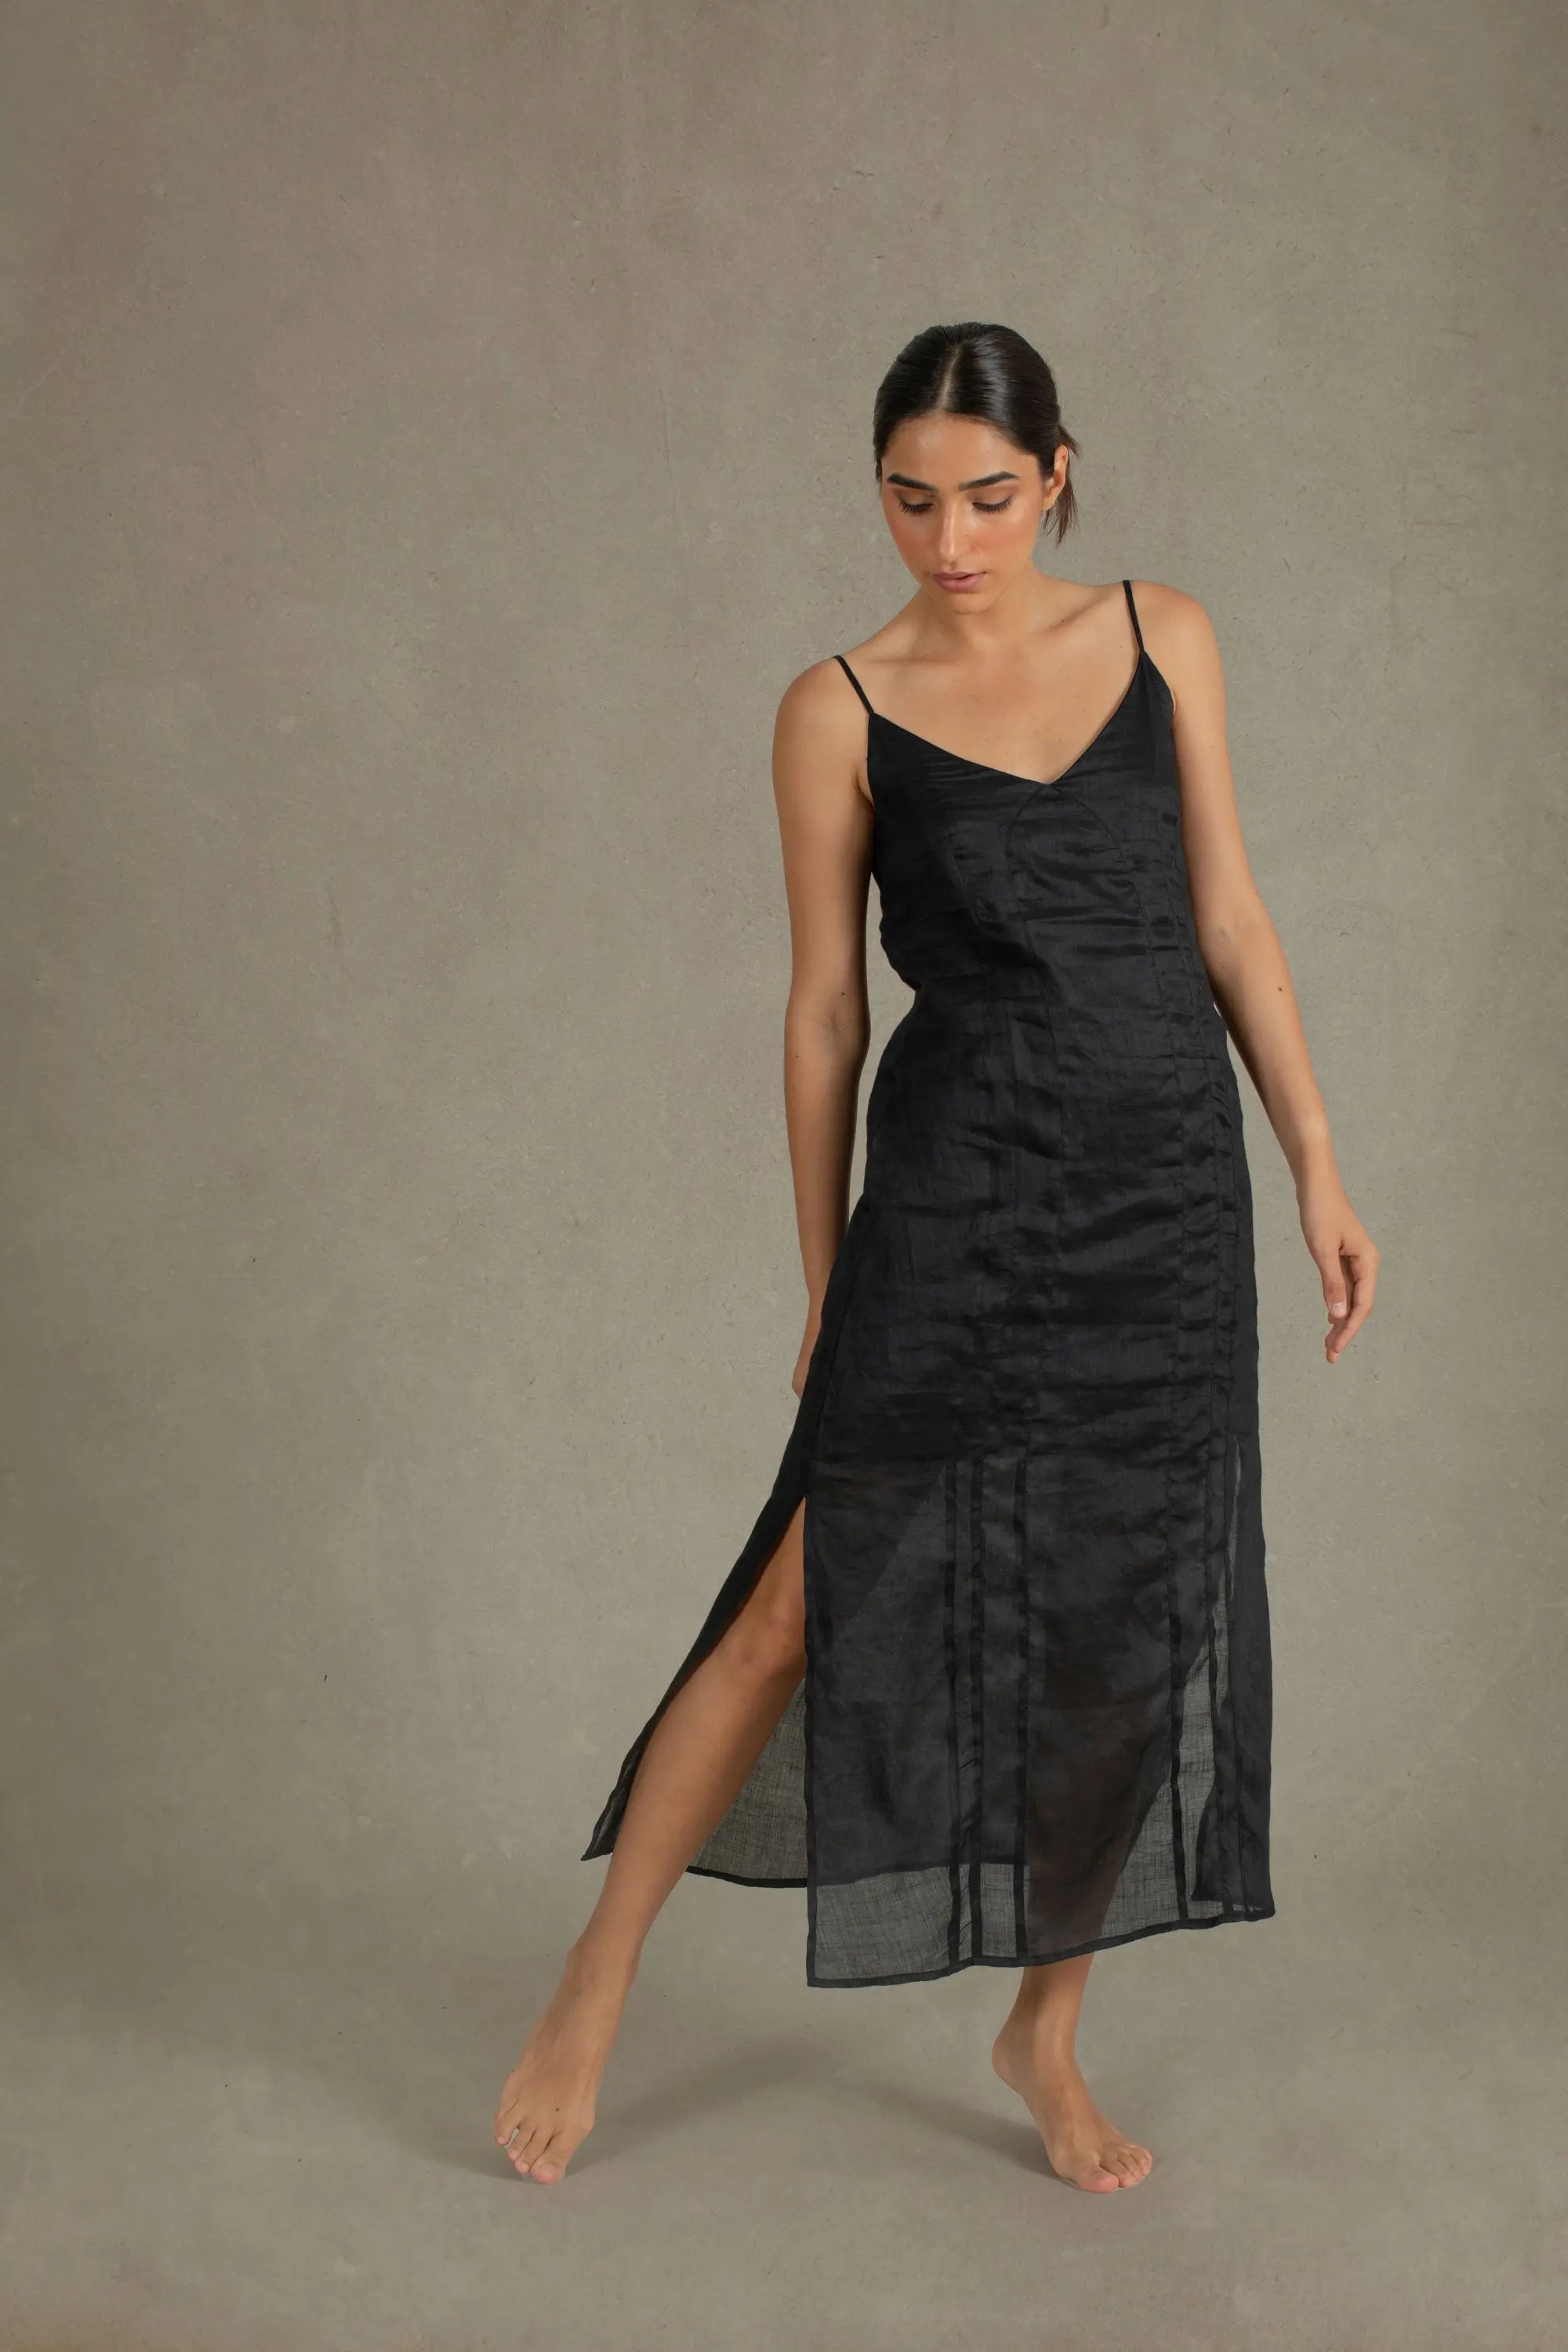 Dara Dress Reversible Black-to-silver Sequin Wrap Dress Loralai Pants  Featuring Embroidery From the Sindhi Region 